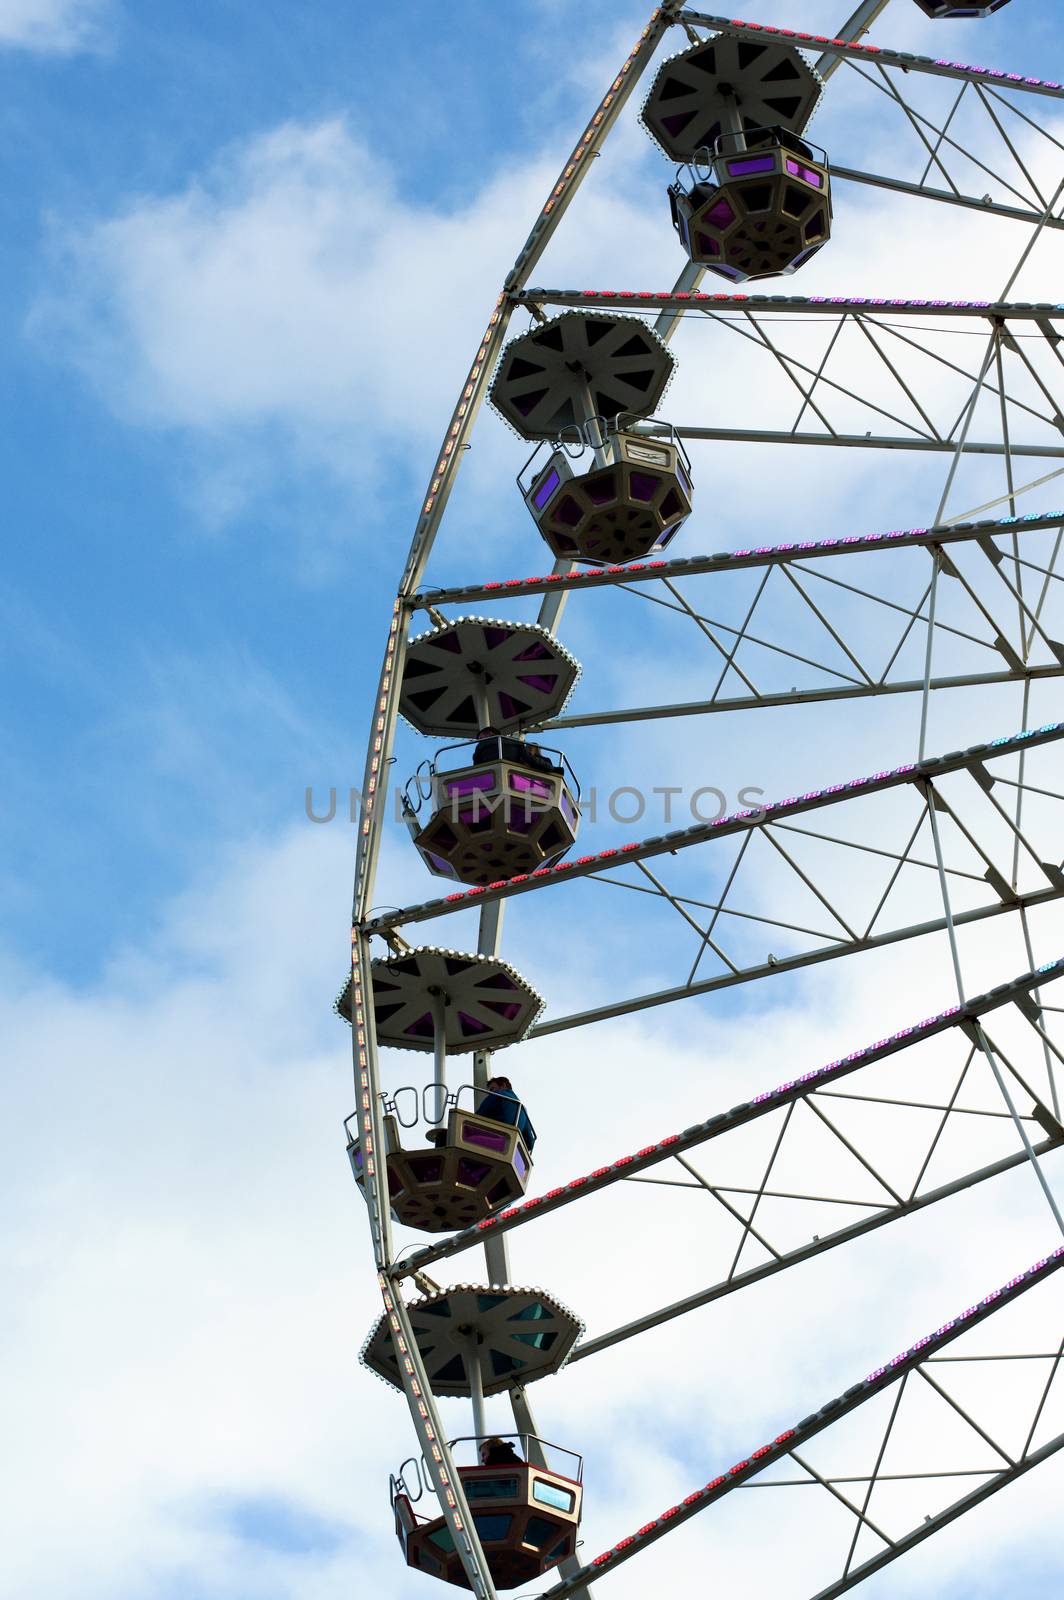 White and Pink Ride Ferris Wheel on Blue Cloudy Sky background Outdoors